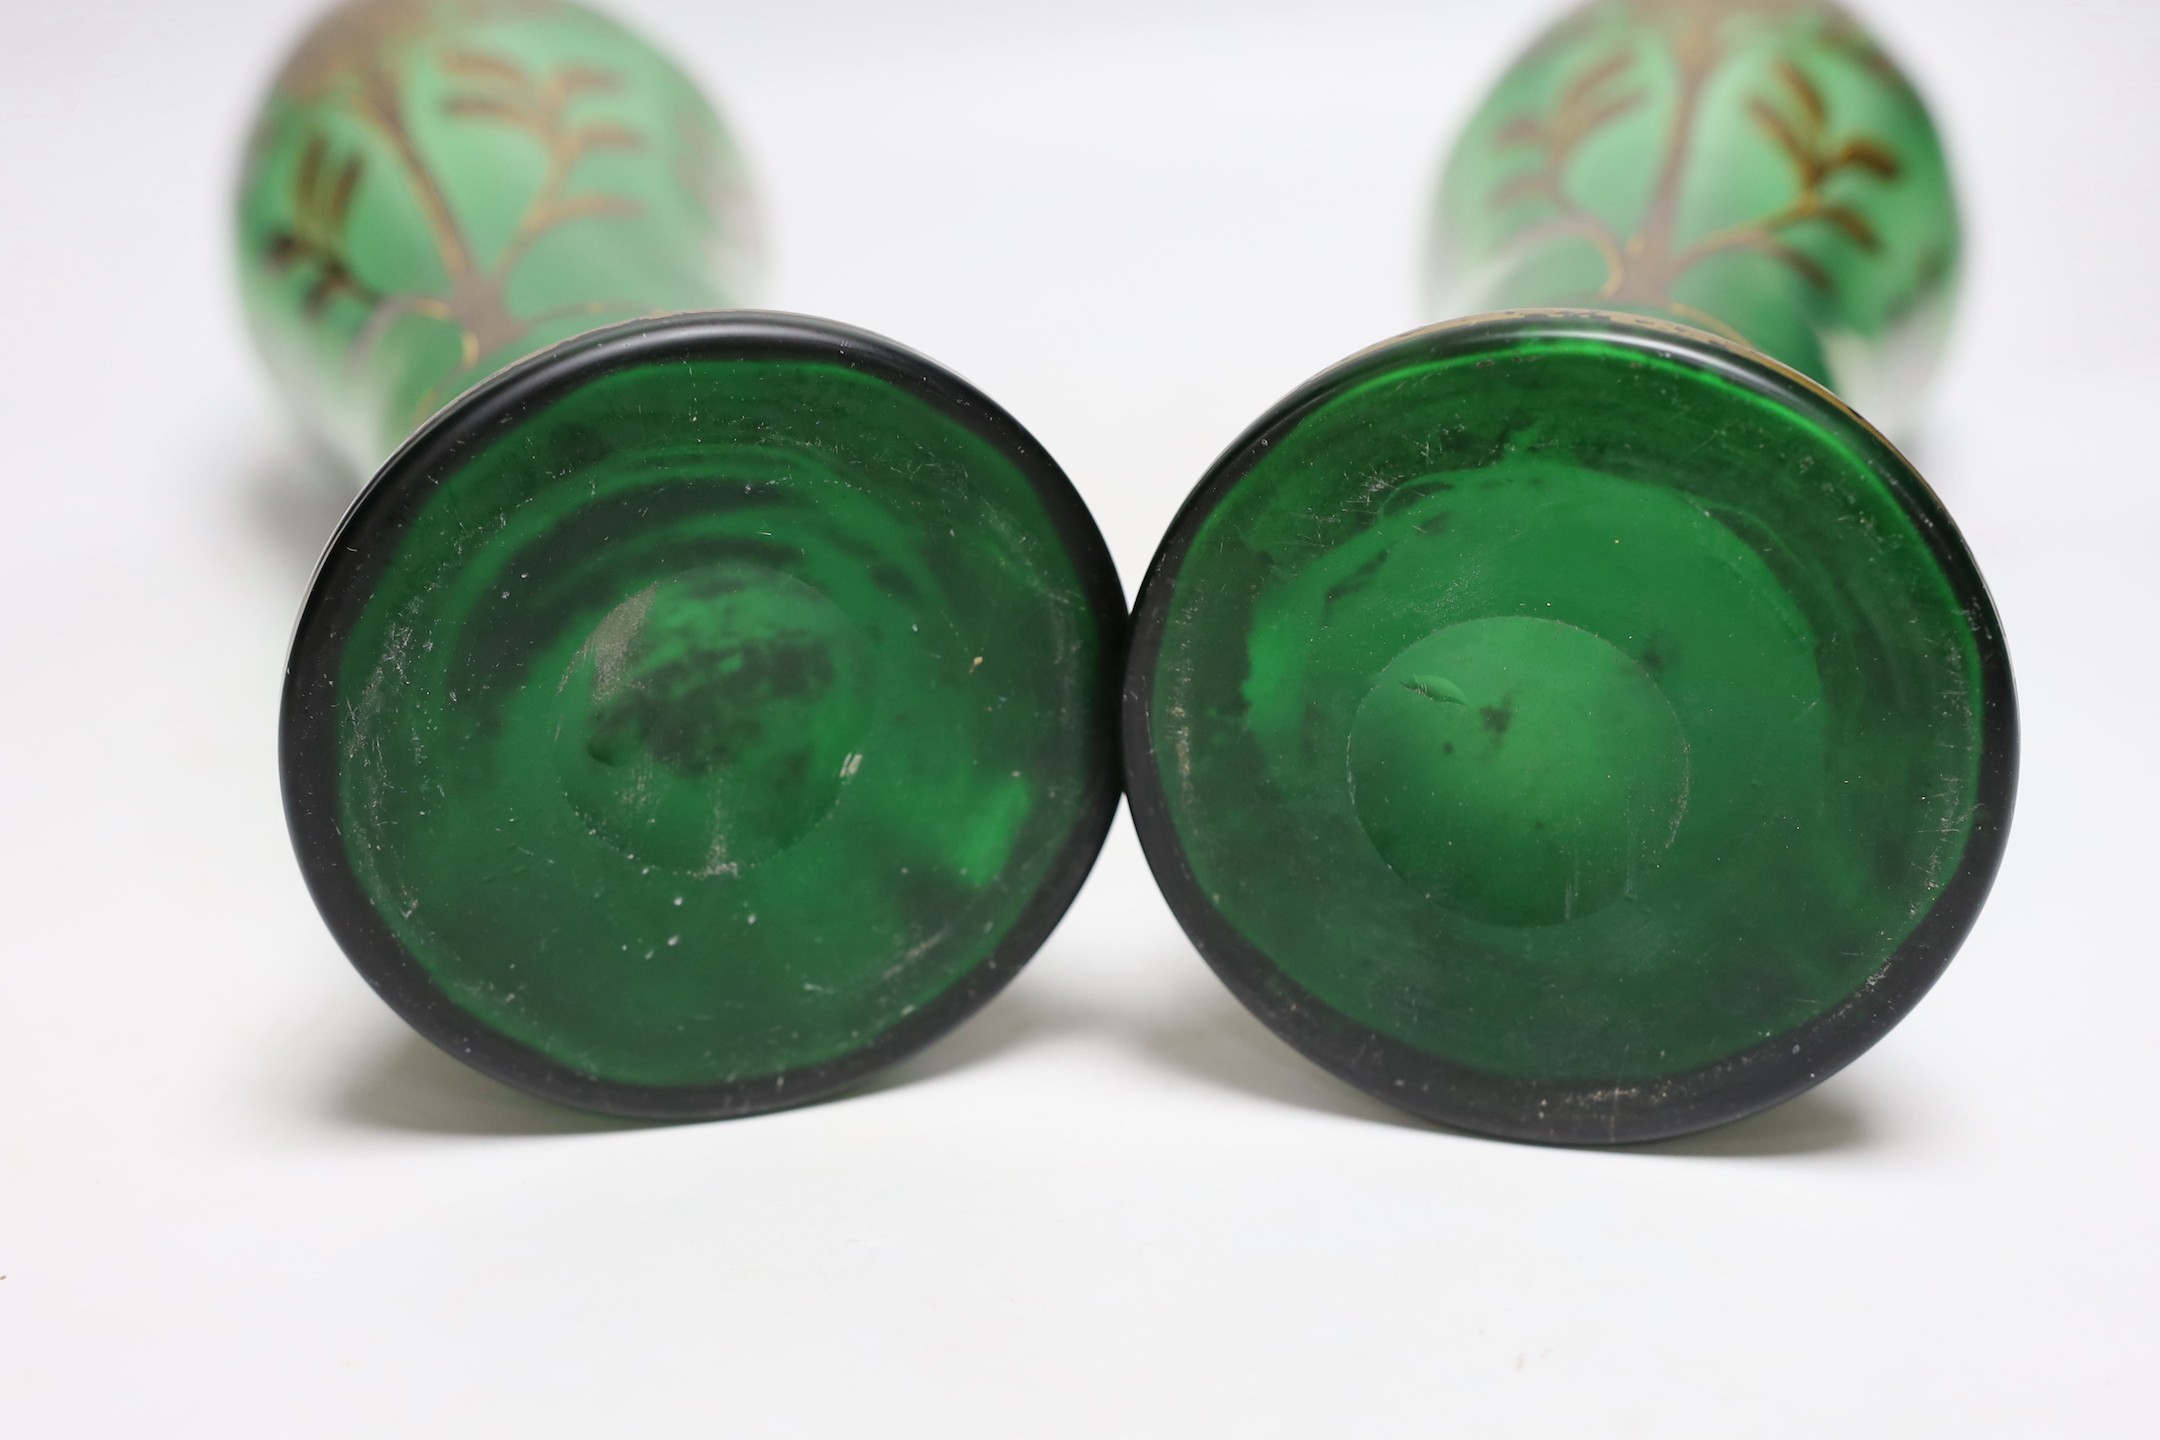 A pair of French green glass and gilt decorated Art Nouveau vases, 34cms high